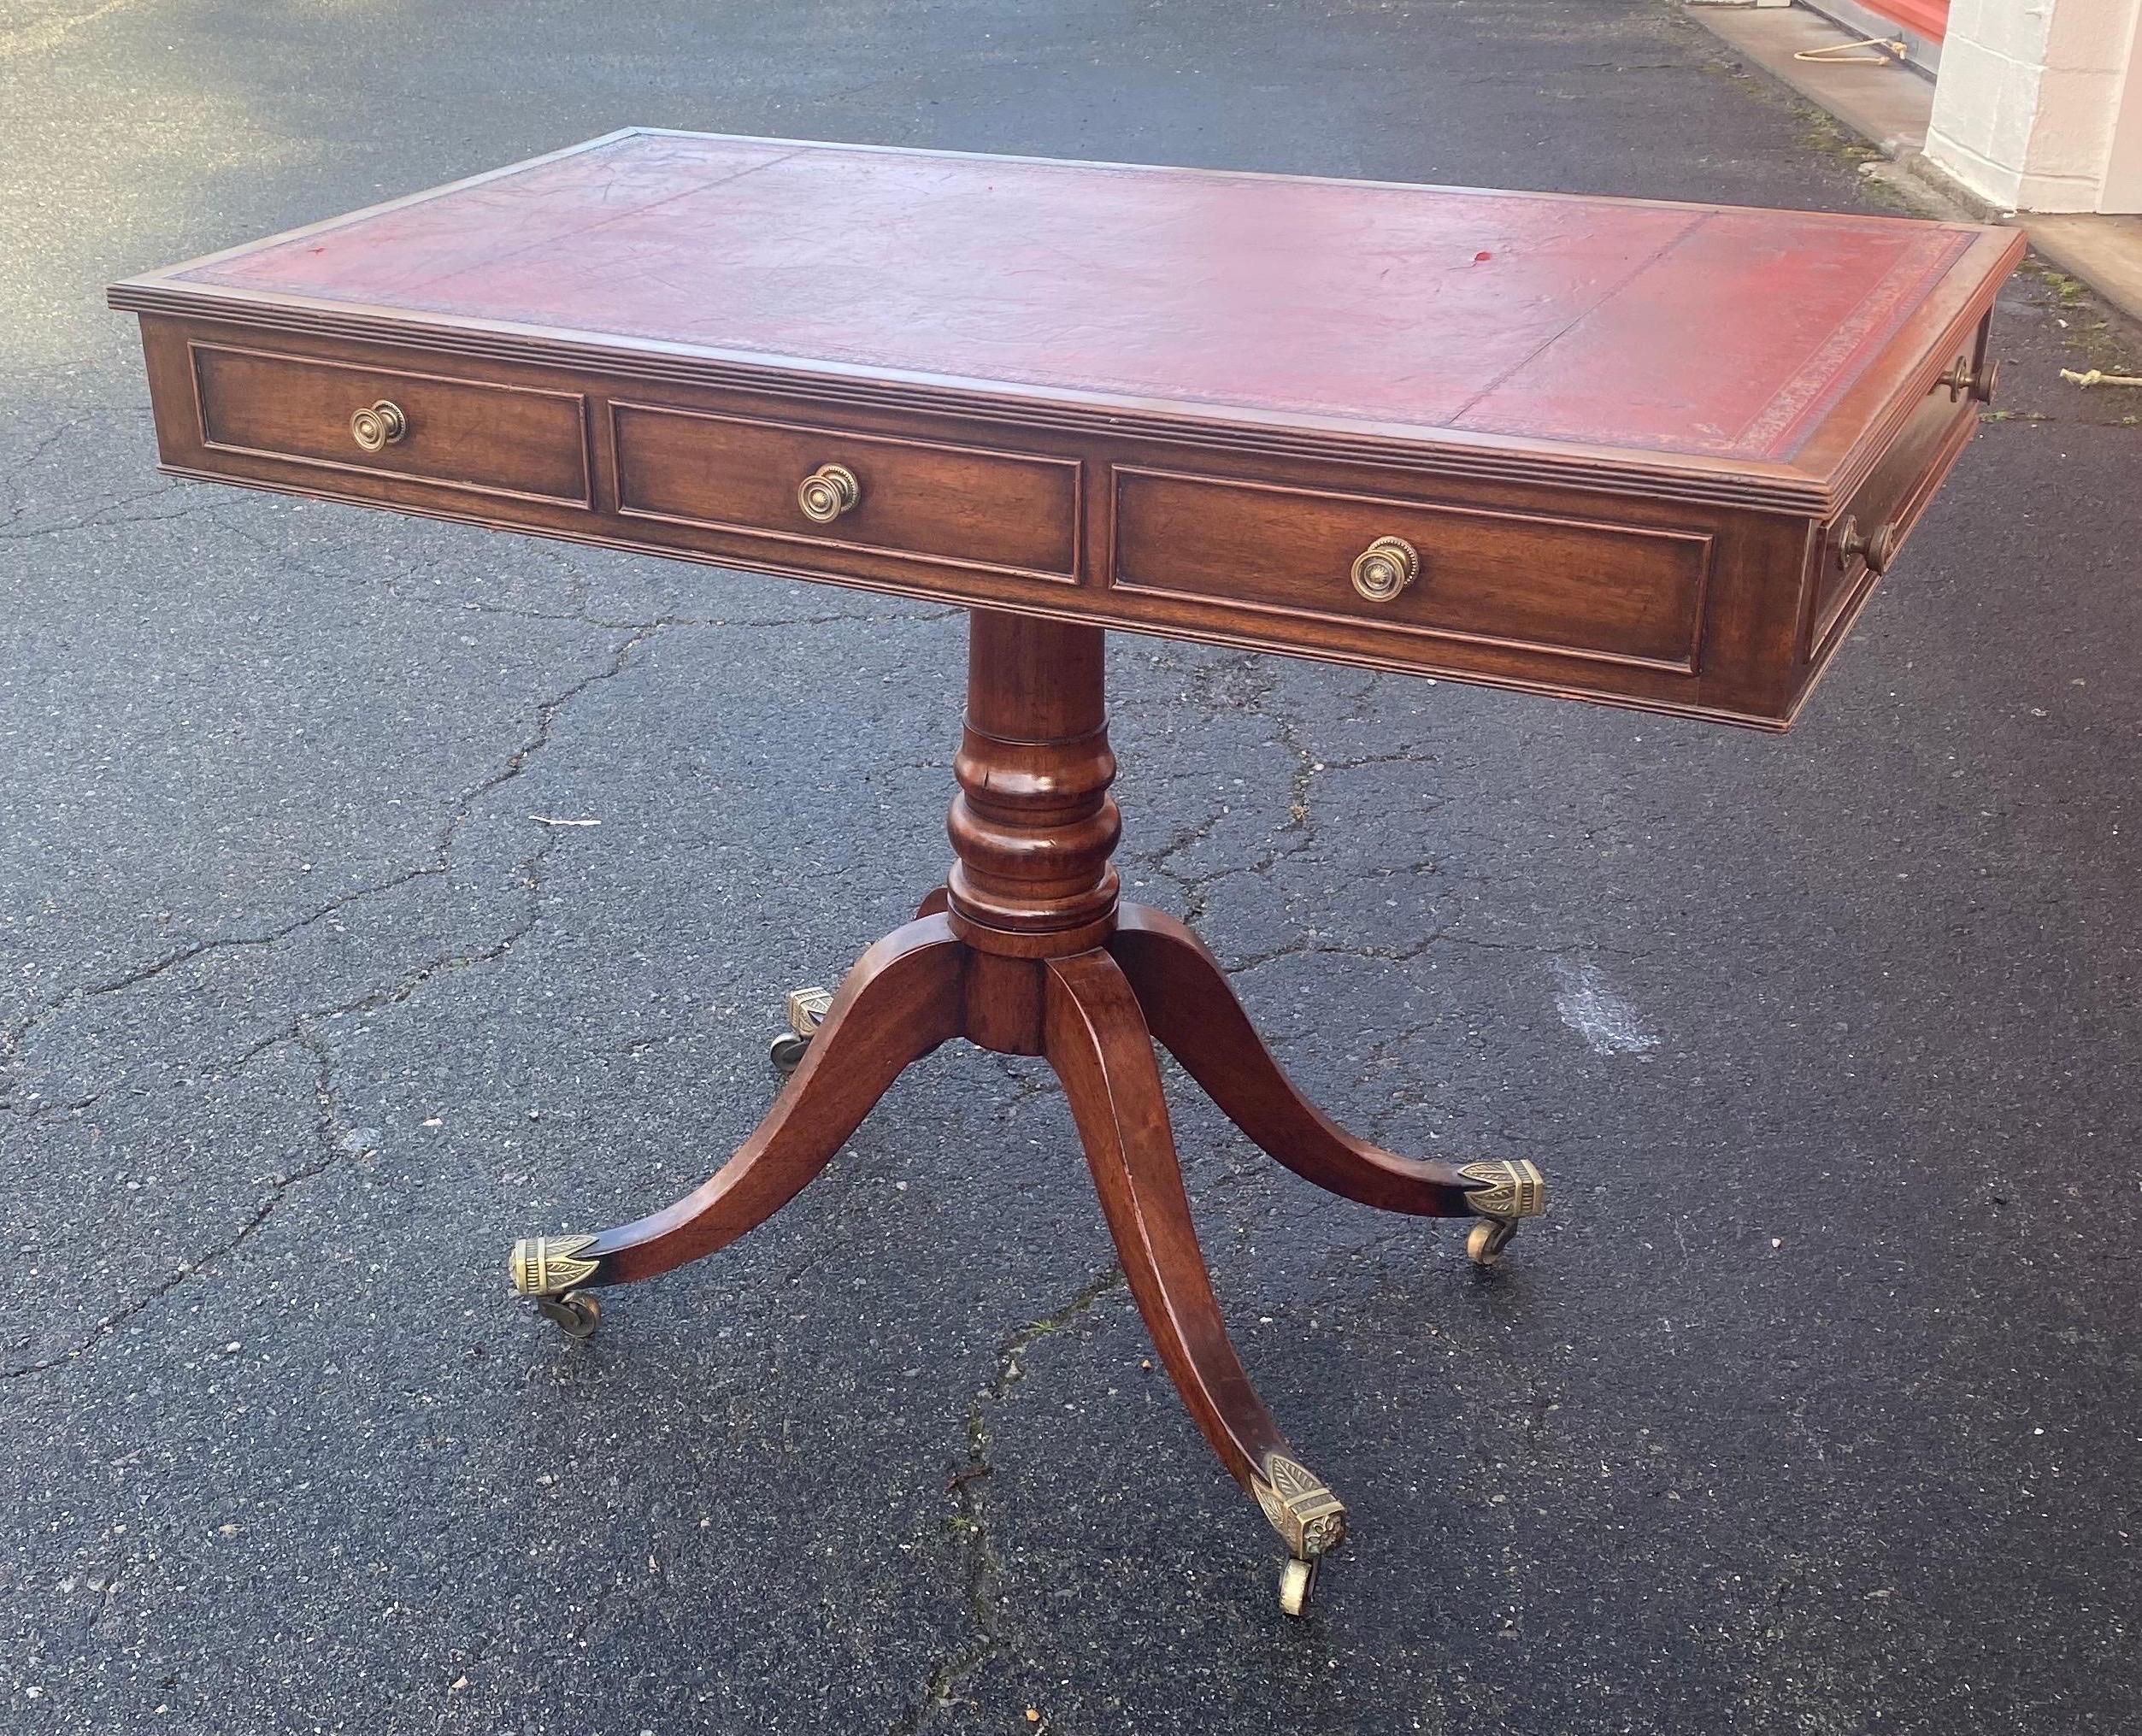 Unique form 19th century Georgian leather top table with side drawers. Great quality mahogany, leather top and castors.